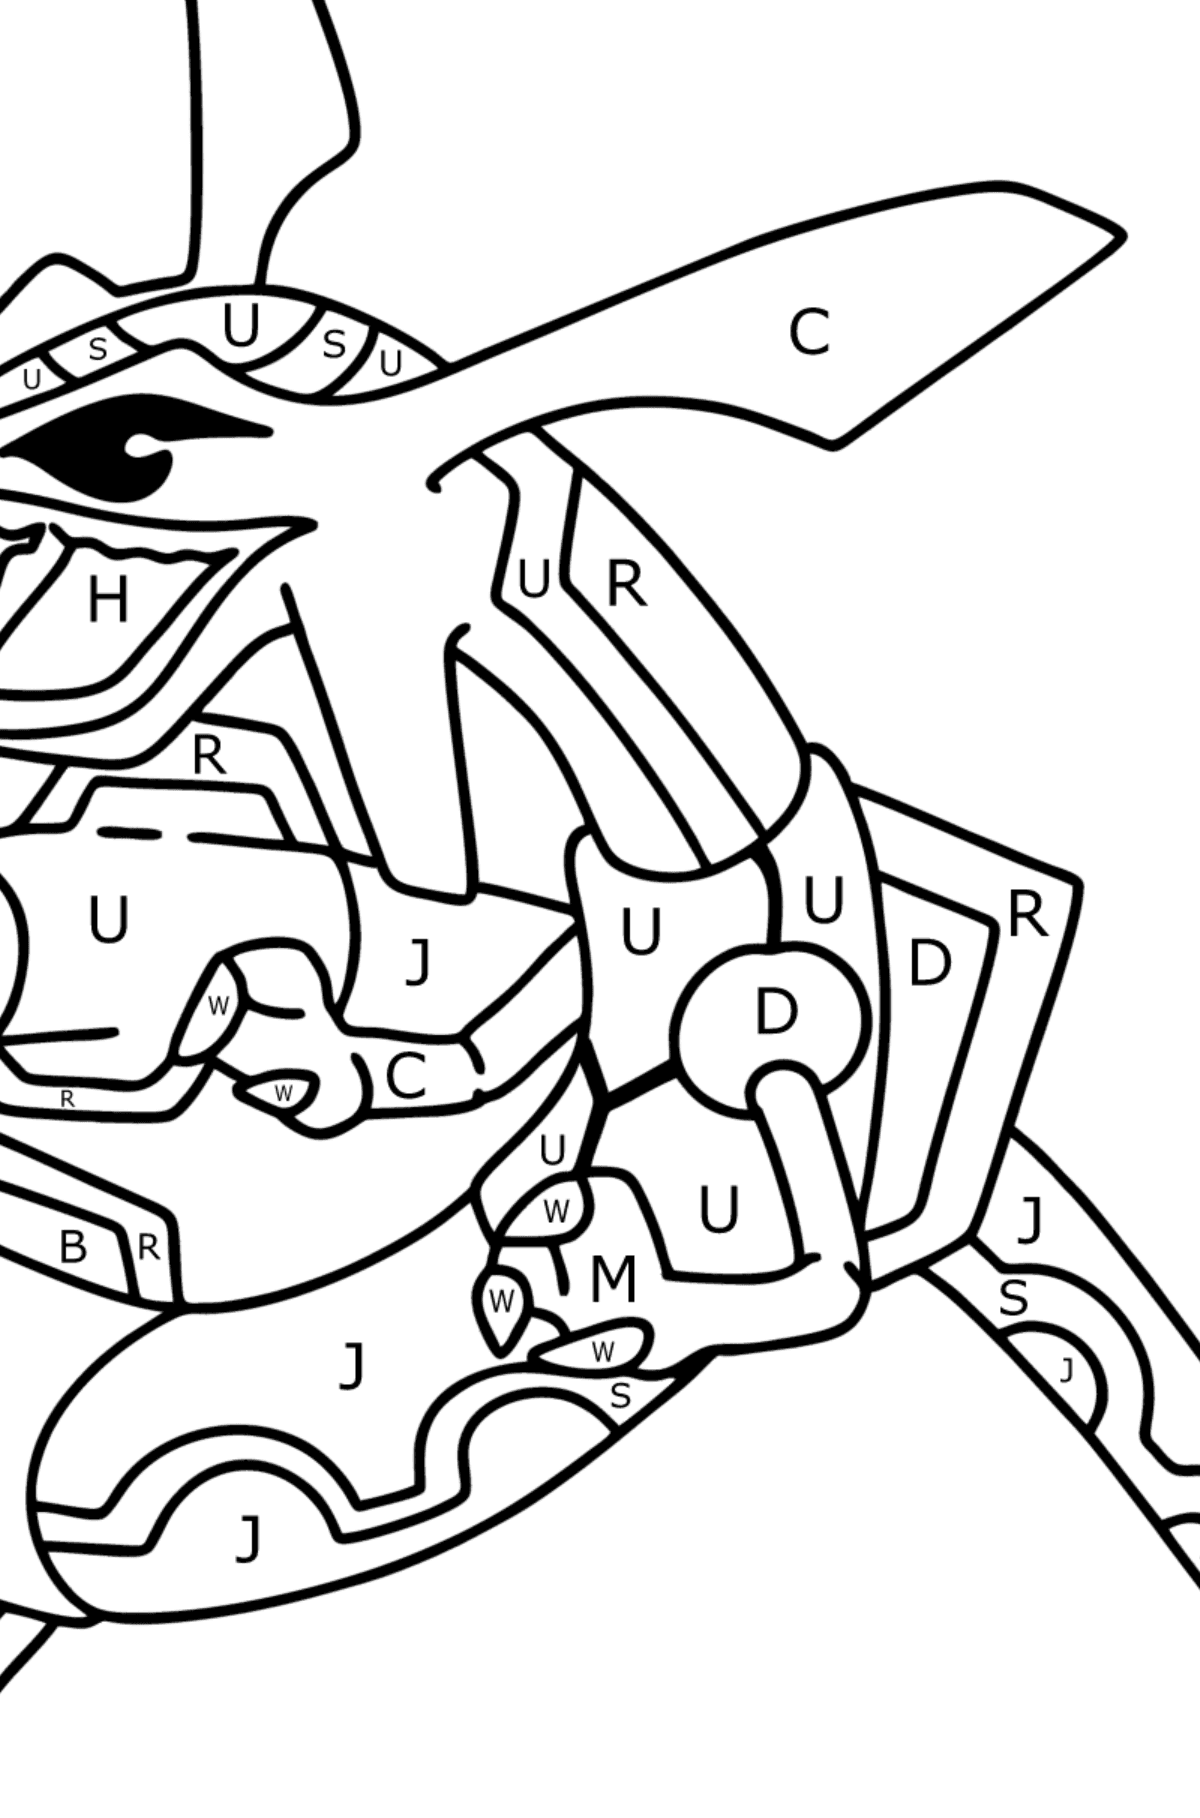 Coloring page Pokemon Go Rayquaza - Coloring by Letters for Kids